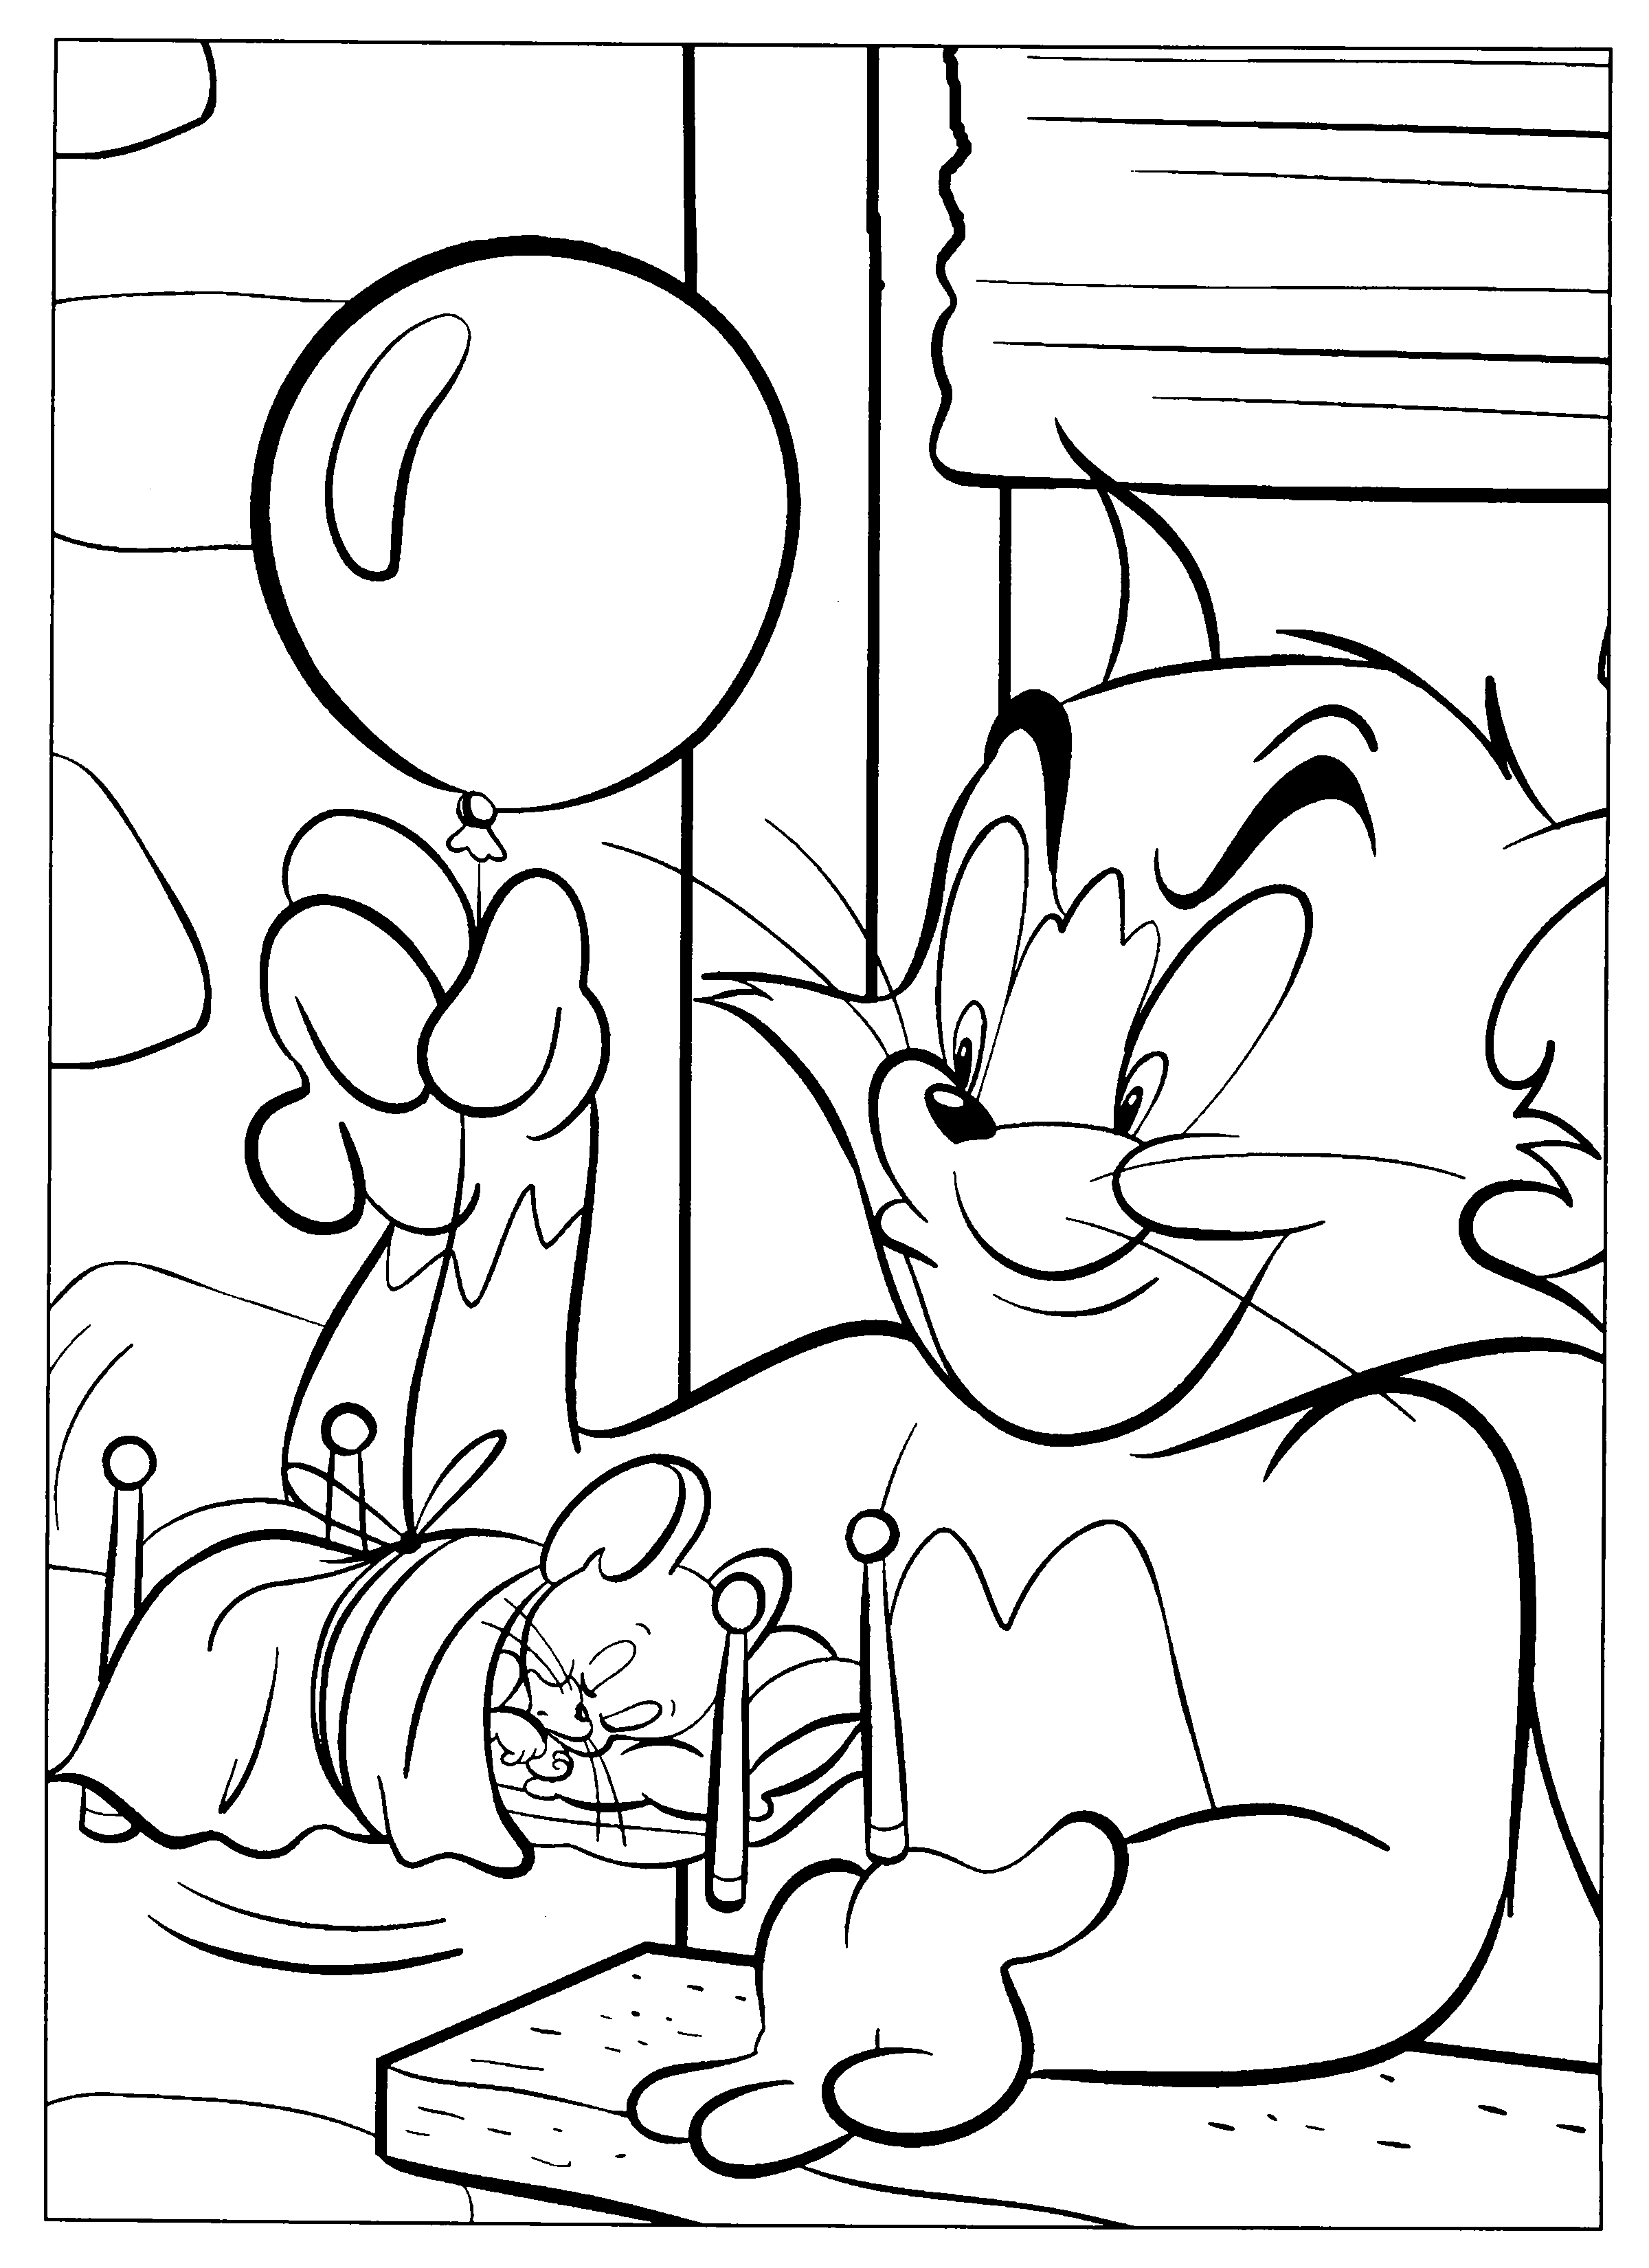 Tom And Jerry Coloring Pages Printable - Printable Word Searches